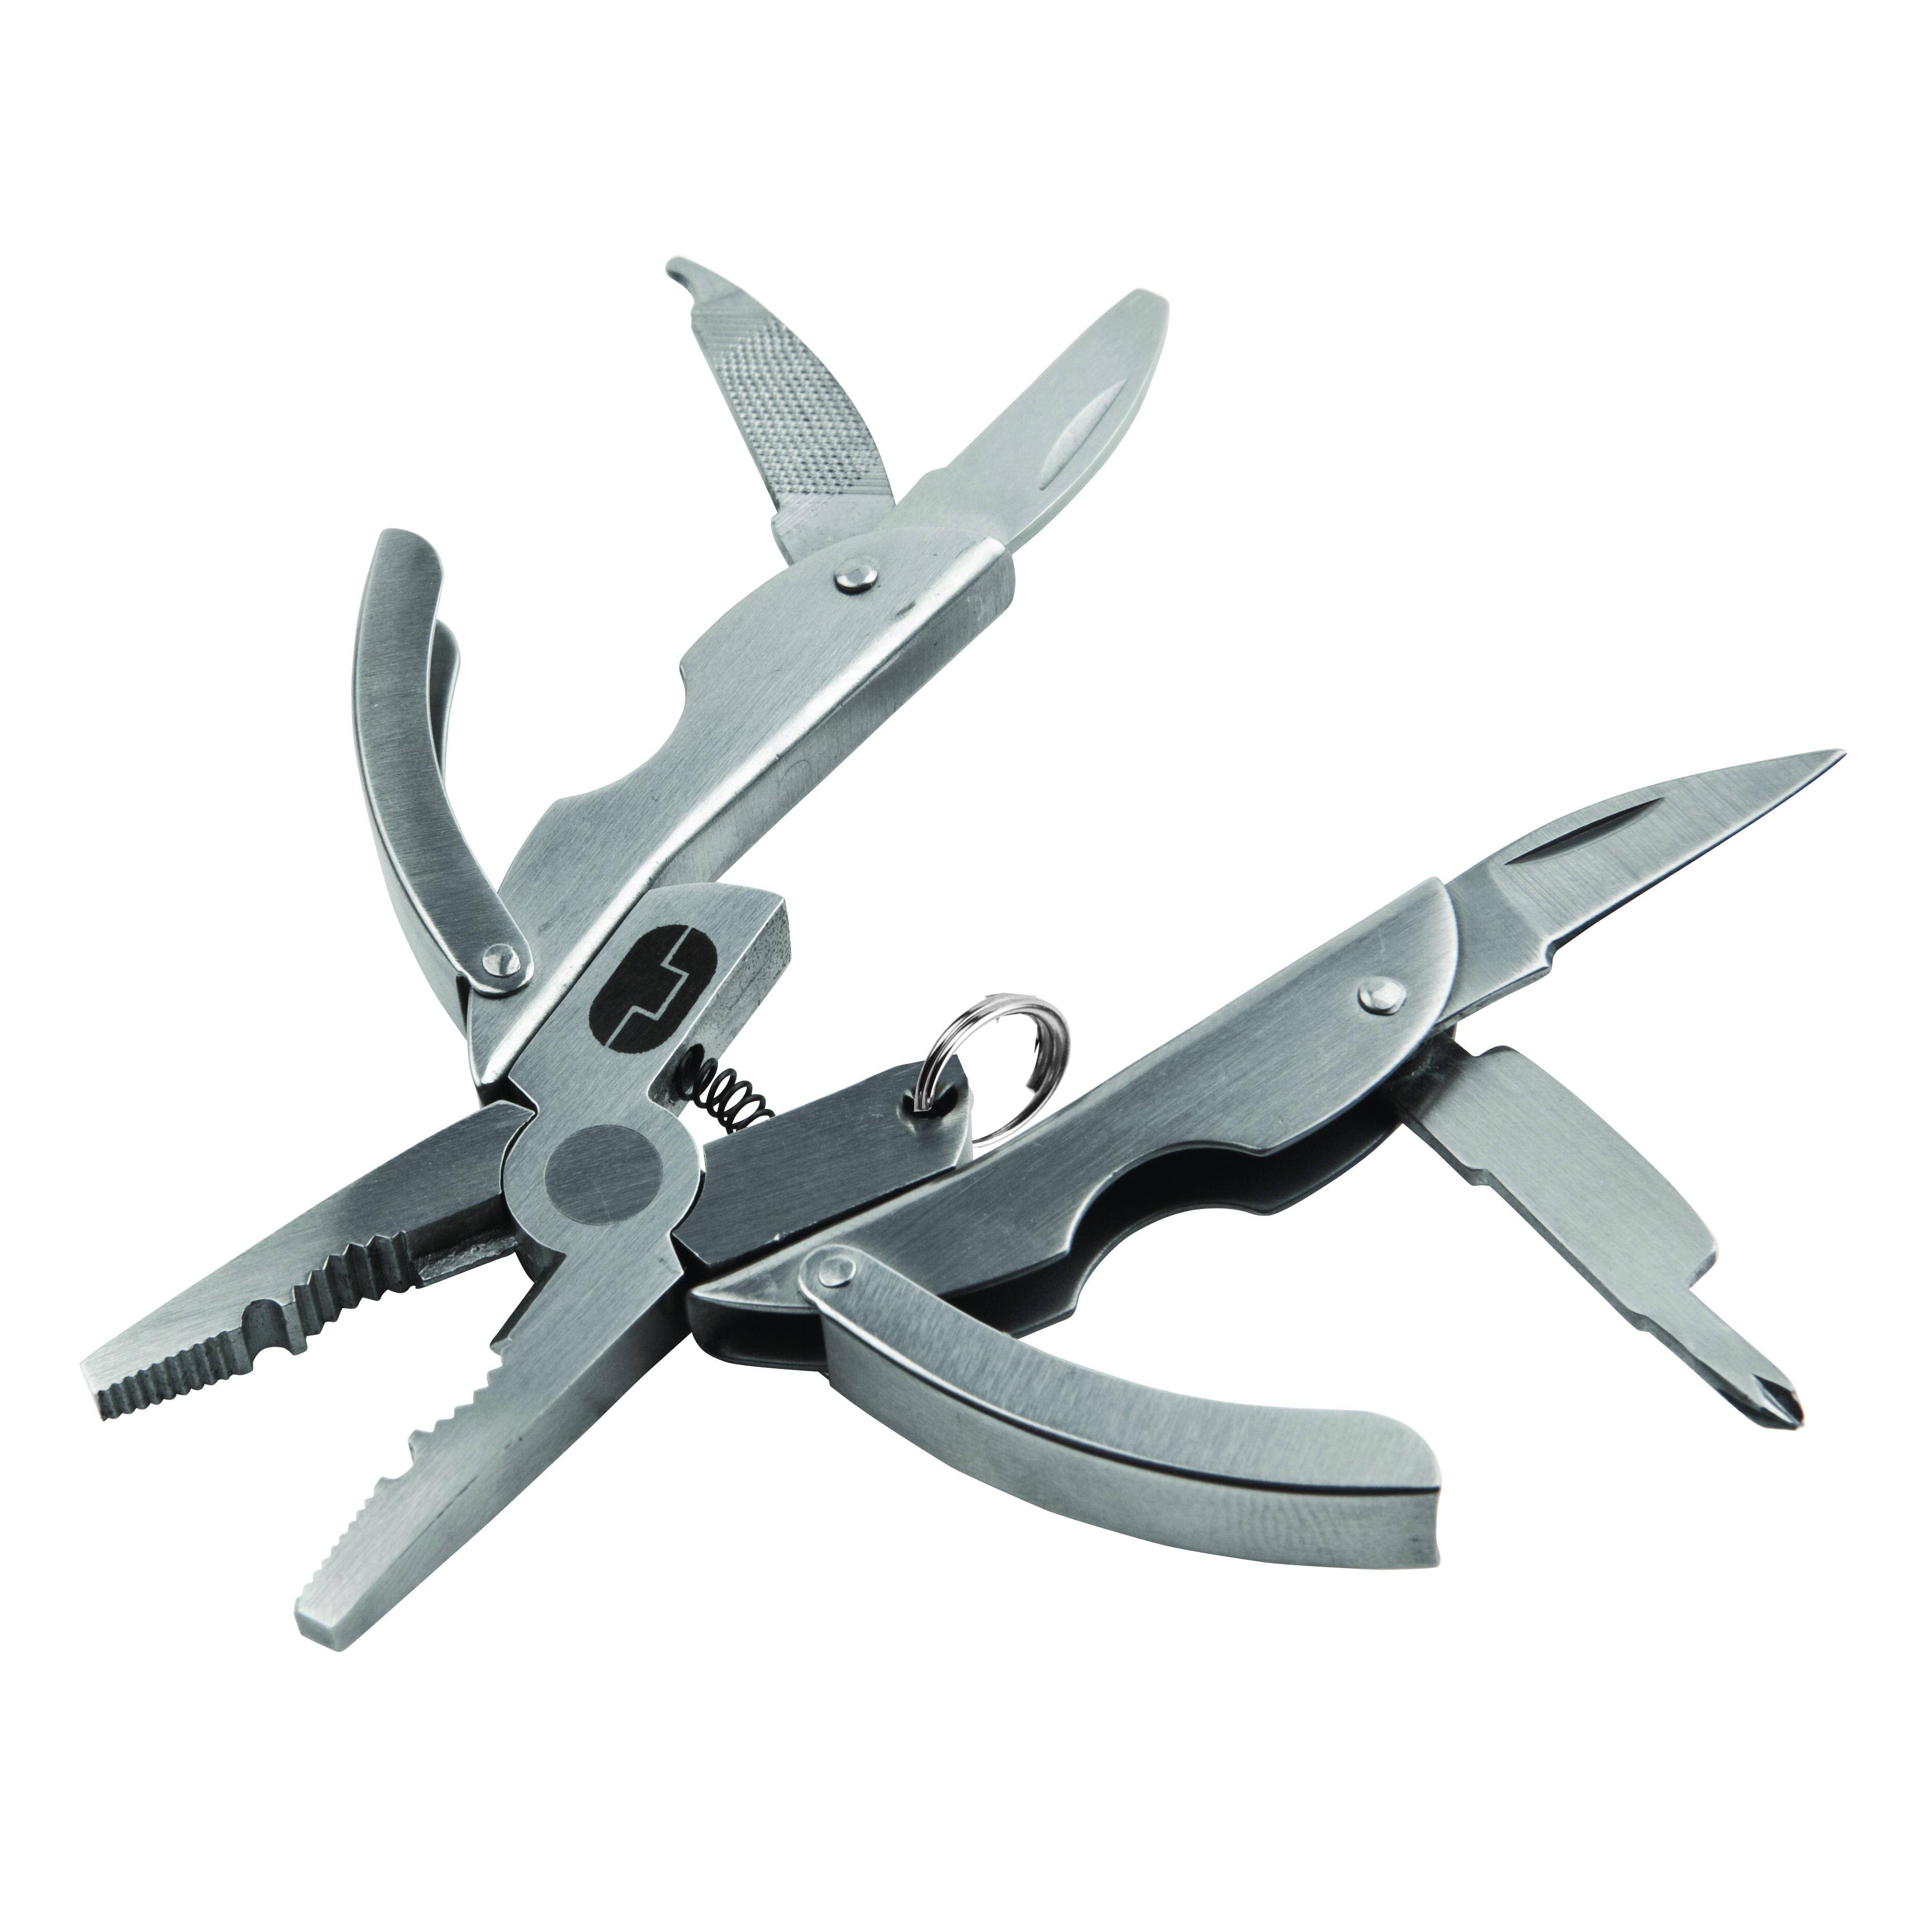 True Utility Scarab Compact Multi Tool with Pliers, Screwdrivers and Knife